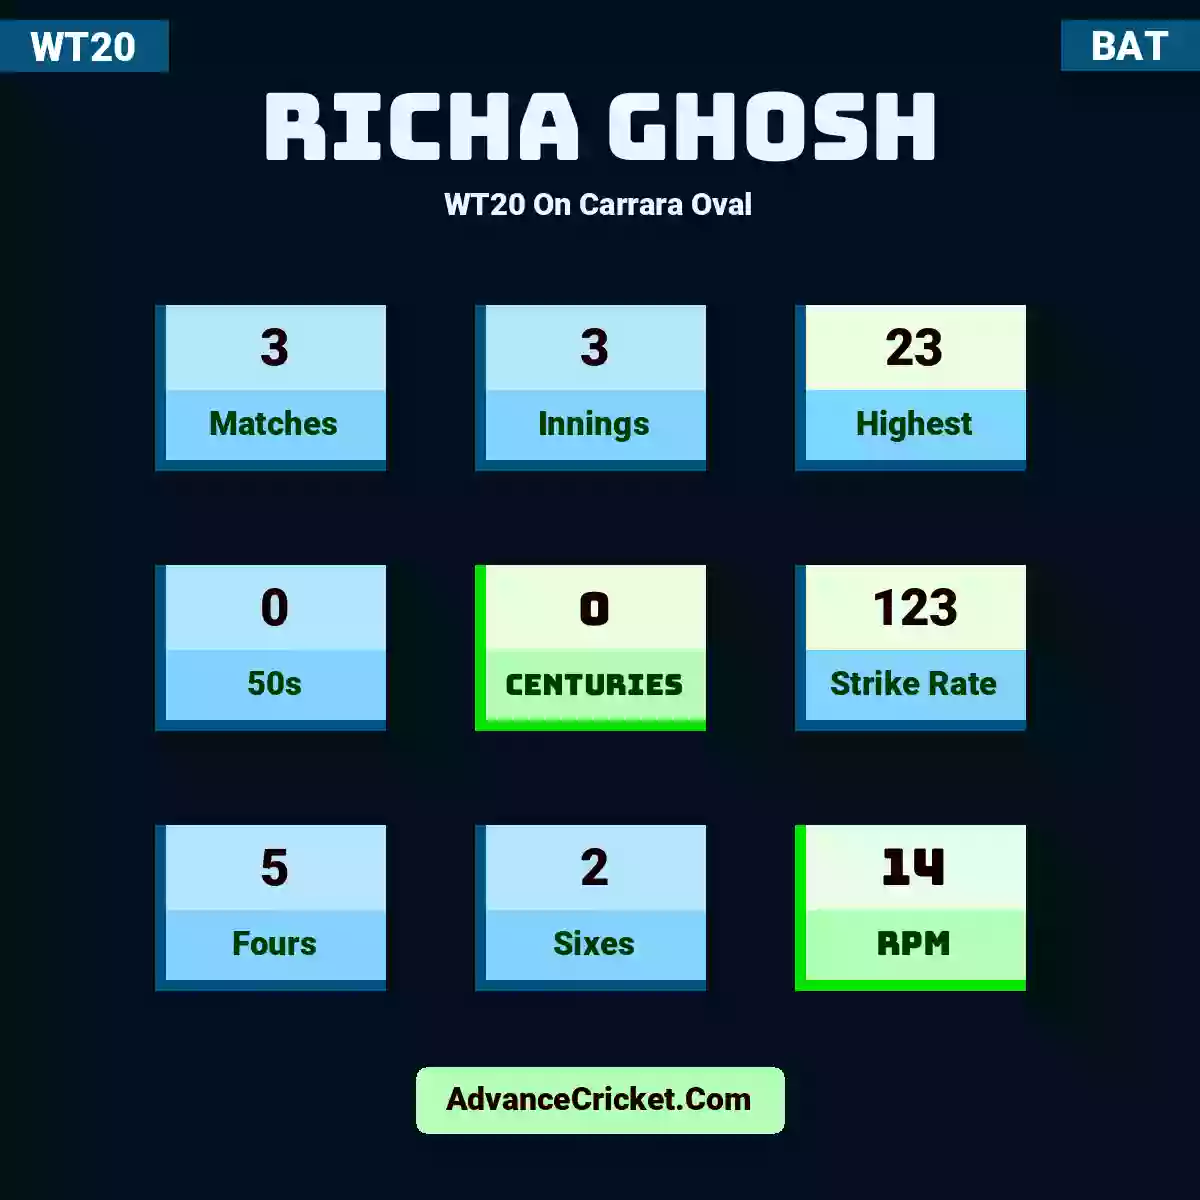 Richa Ghosh WT20  On Carrara Oval, Richa Ghosh played 3 matches, scored 23 runs as highest, 0 half-centuries, and 0 centuries, with a strike rate of 123. R.Ghosh hit 5 fours and 2 sixes, with an RPM of 14.